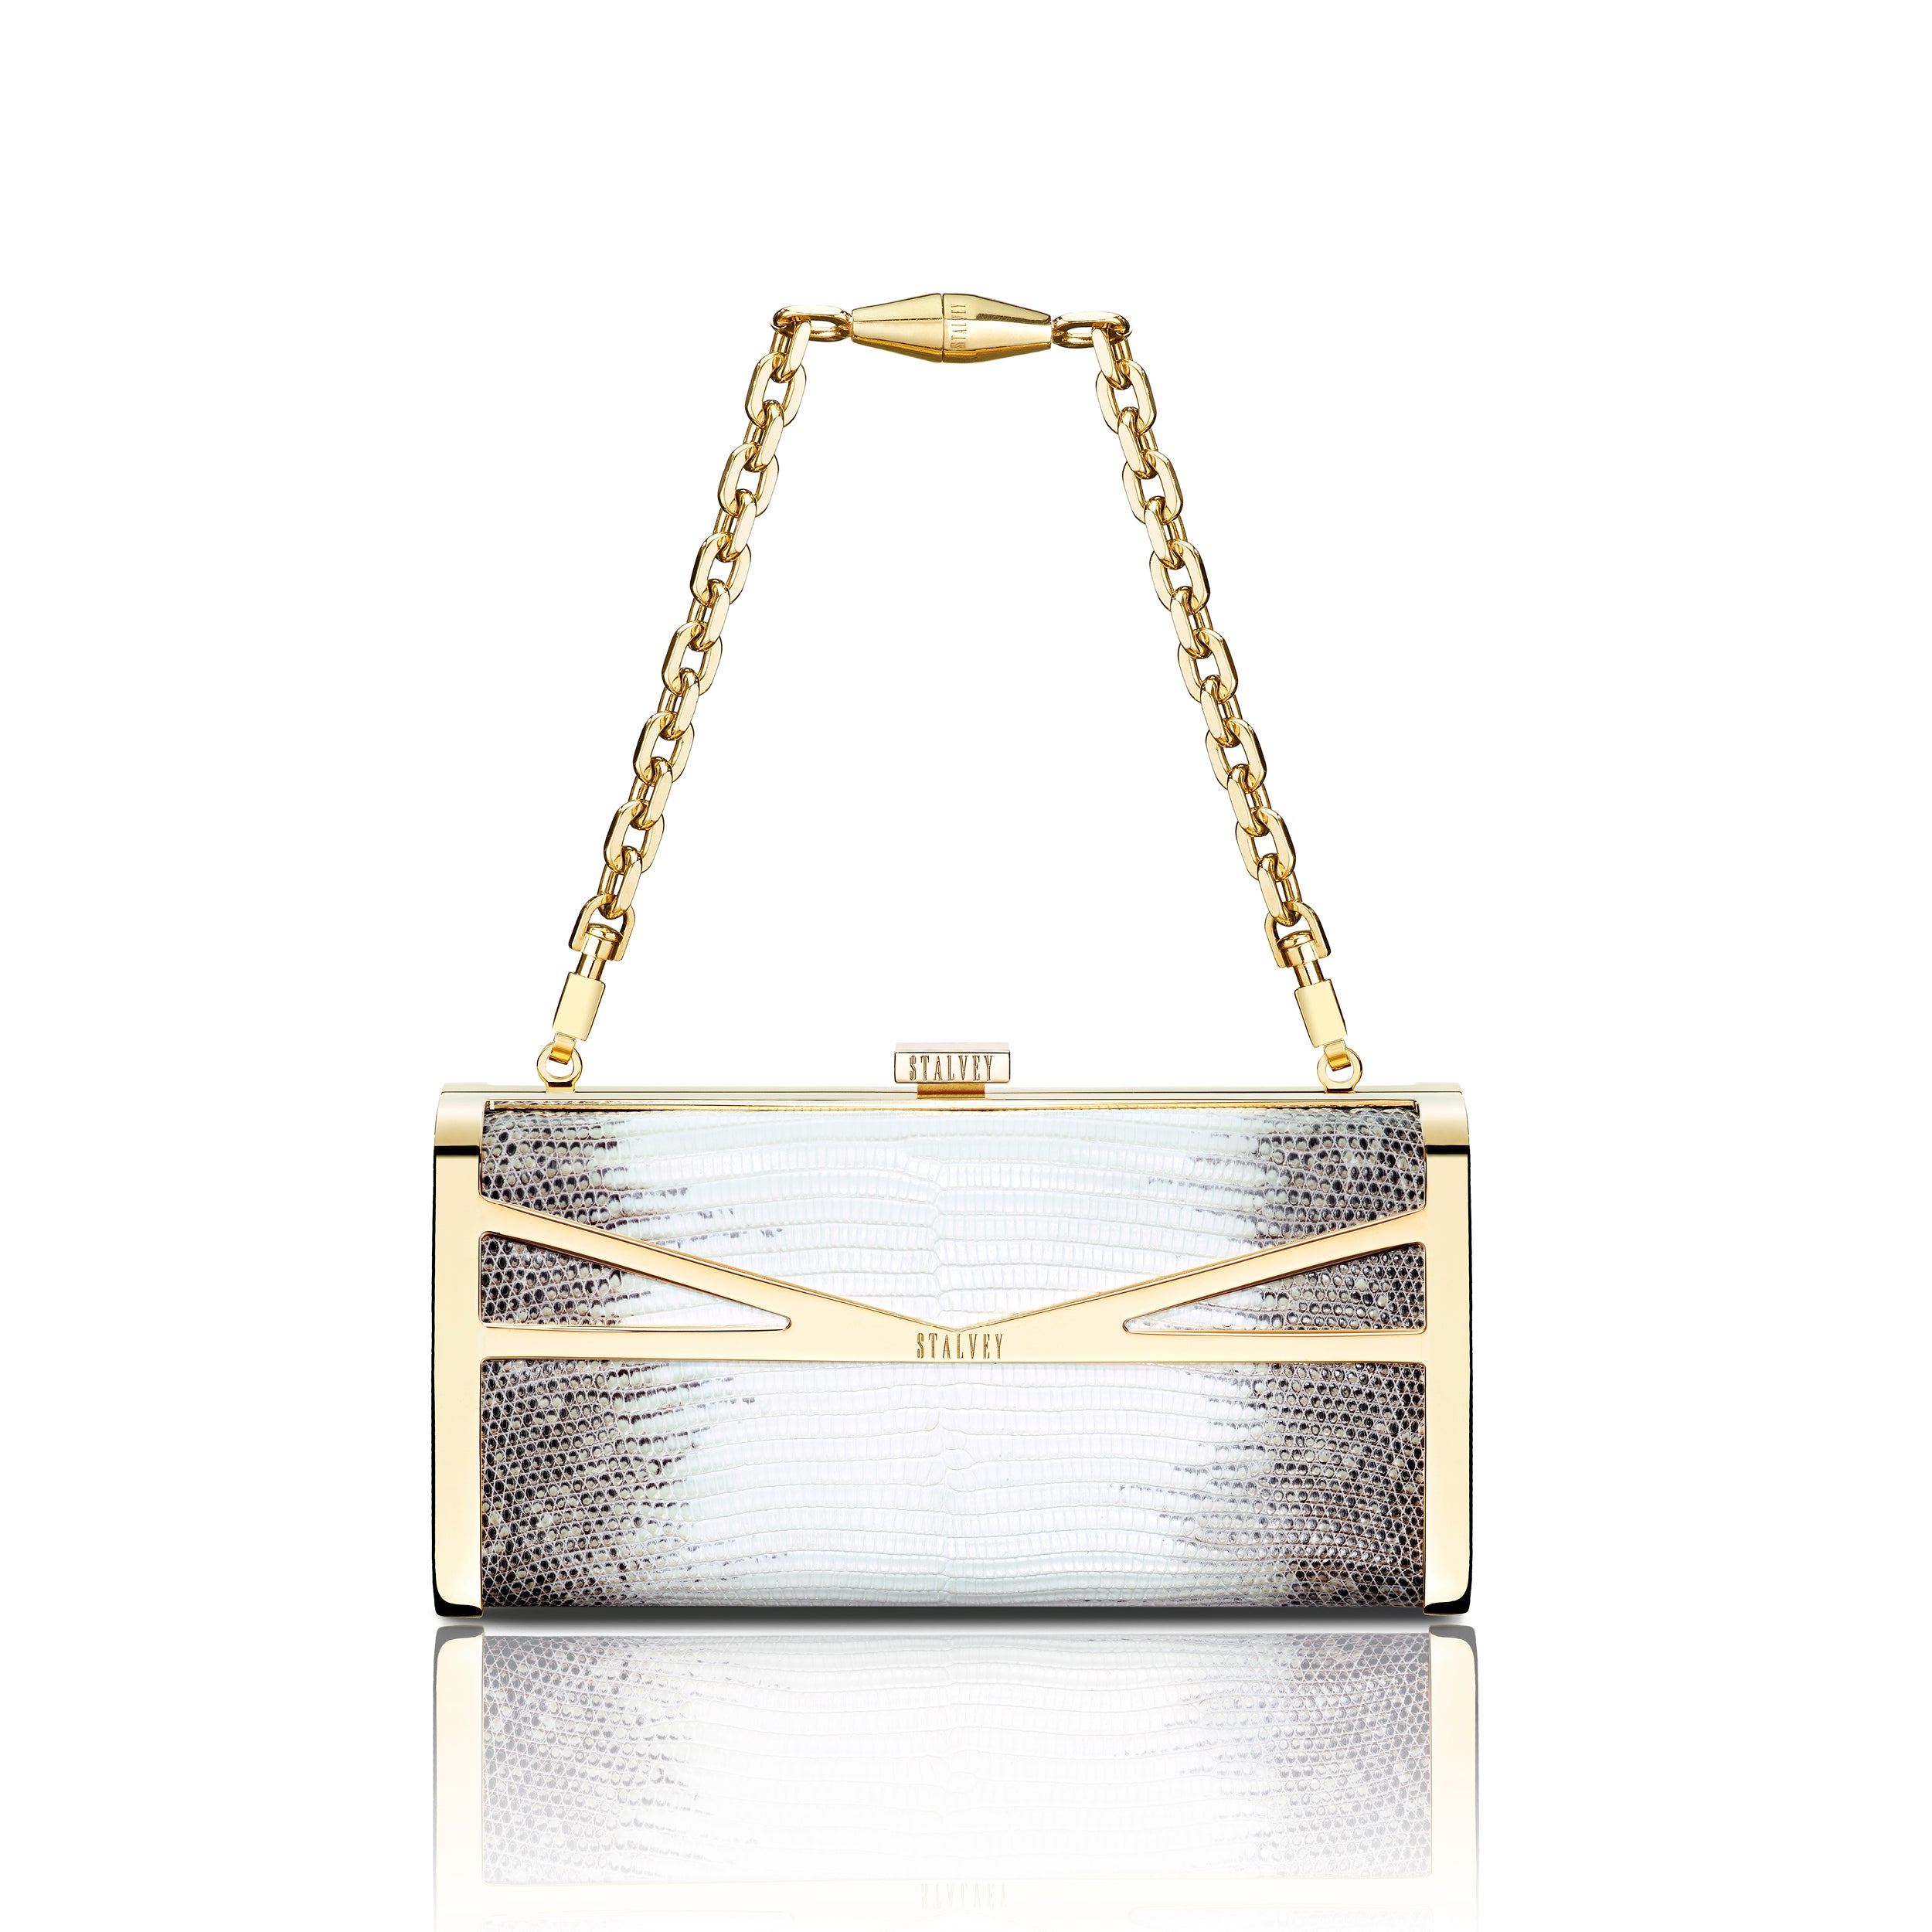 STALVEY Square Clutch in Natural Ring Lizard with 24kt Gold Hardware Front View with Chain